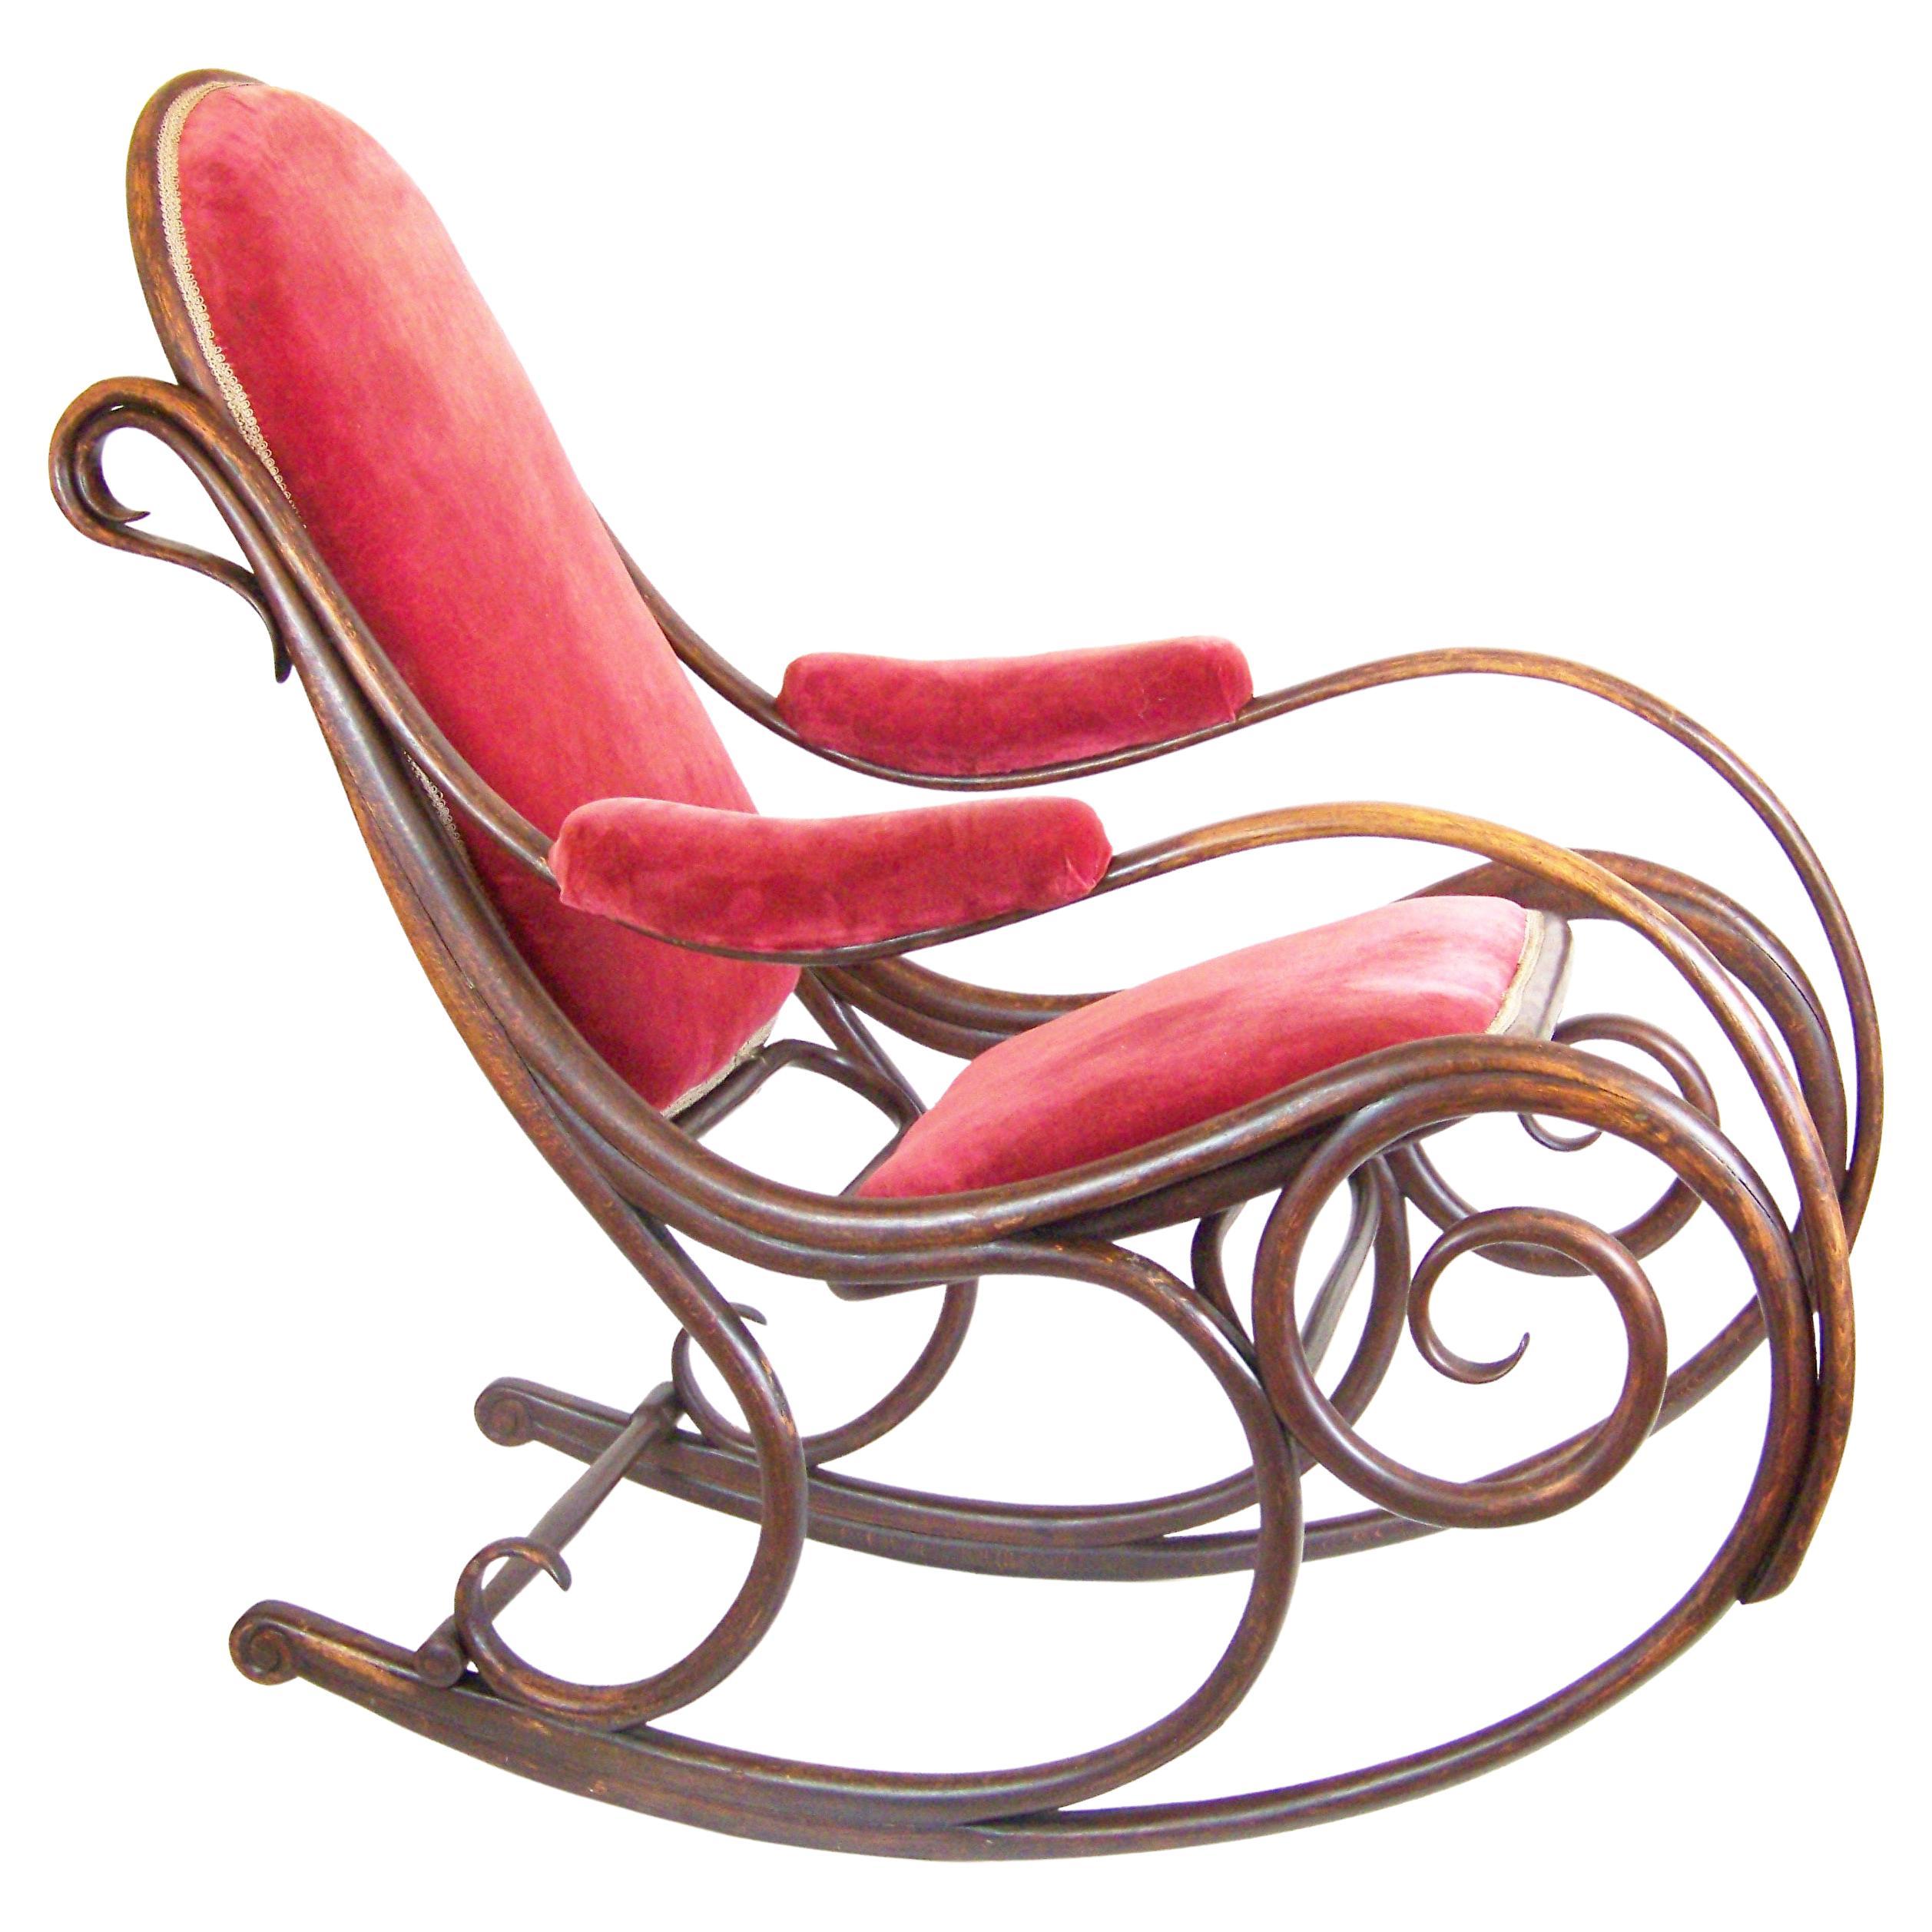 Michael Thonet Rocking Chairs - 11 For Sale at 1stDibs | thonet rocking  chair no 1